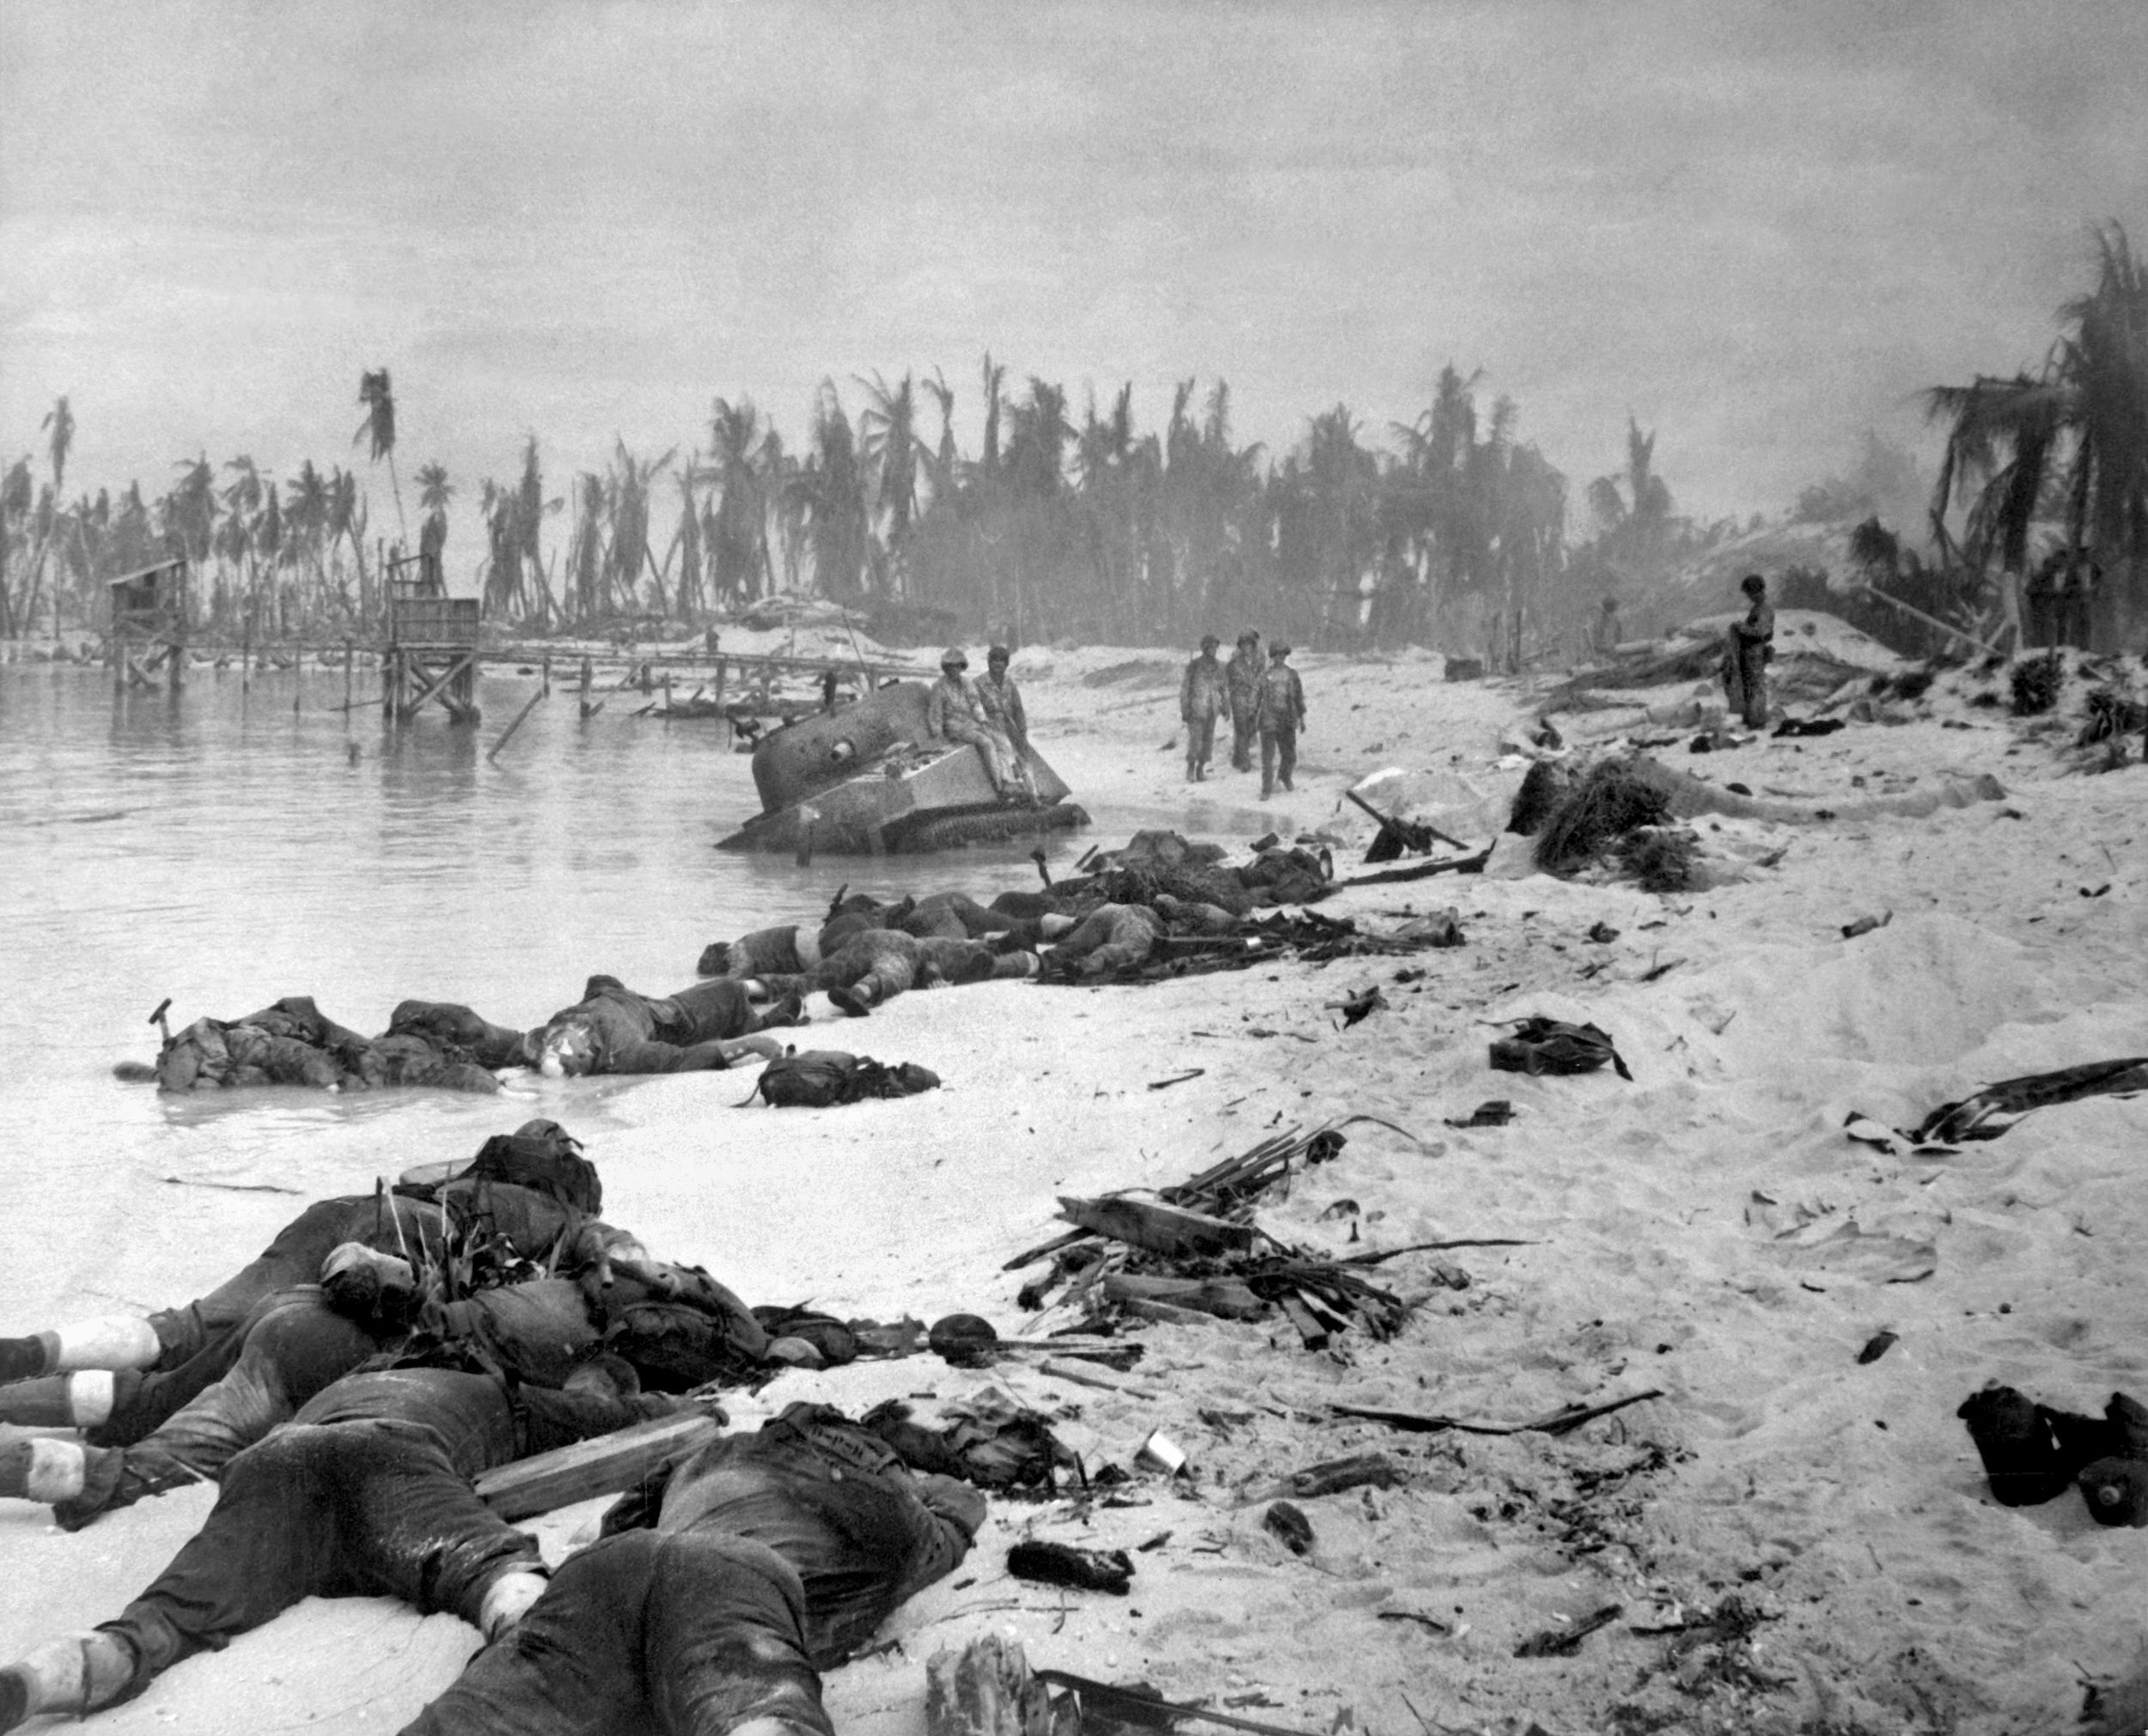 The Japanese defenders of Betio had presighted their weapons, subjecting the Marines to interlocking fields of fire that took a heavy toll. A Sherman tank lies disabled in the shallow water; few of the American tanks committed to the landing actually made it ashore, but those that did helped tip the balance in the Marines’ favor. The American public, shocked by images such as these, demanded censure of the American commanders who had ordered the assault.